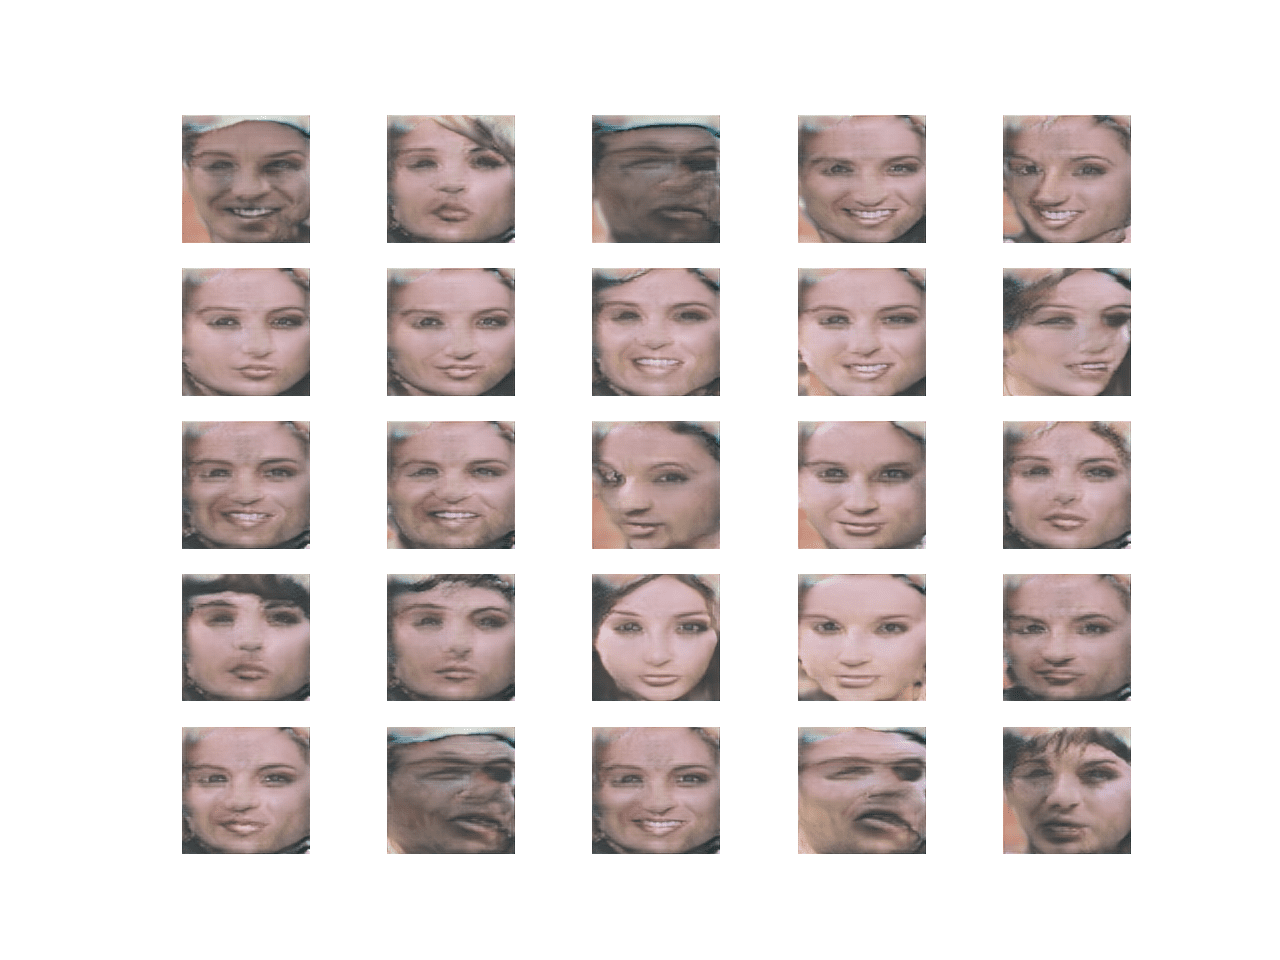 Plot of 25 Synthetic Faces With 128x128 Resolution Generated With a Final Progressive Growing GAN Model